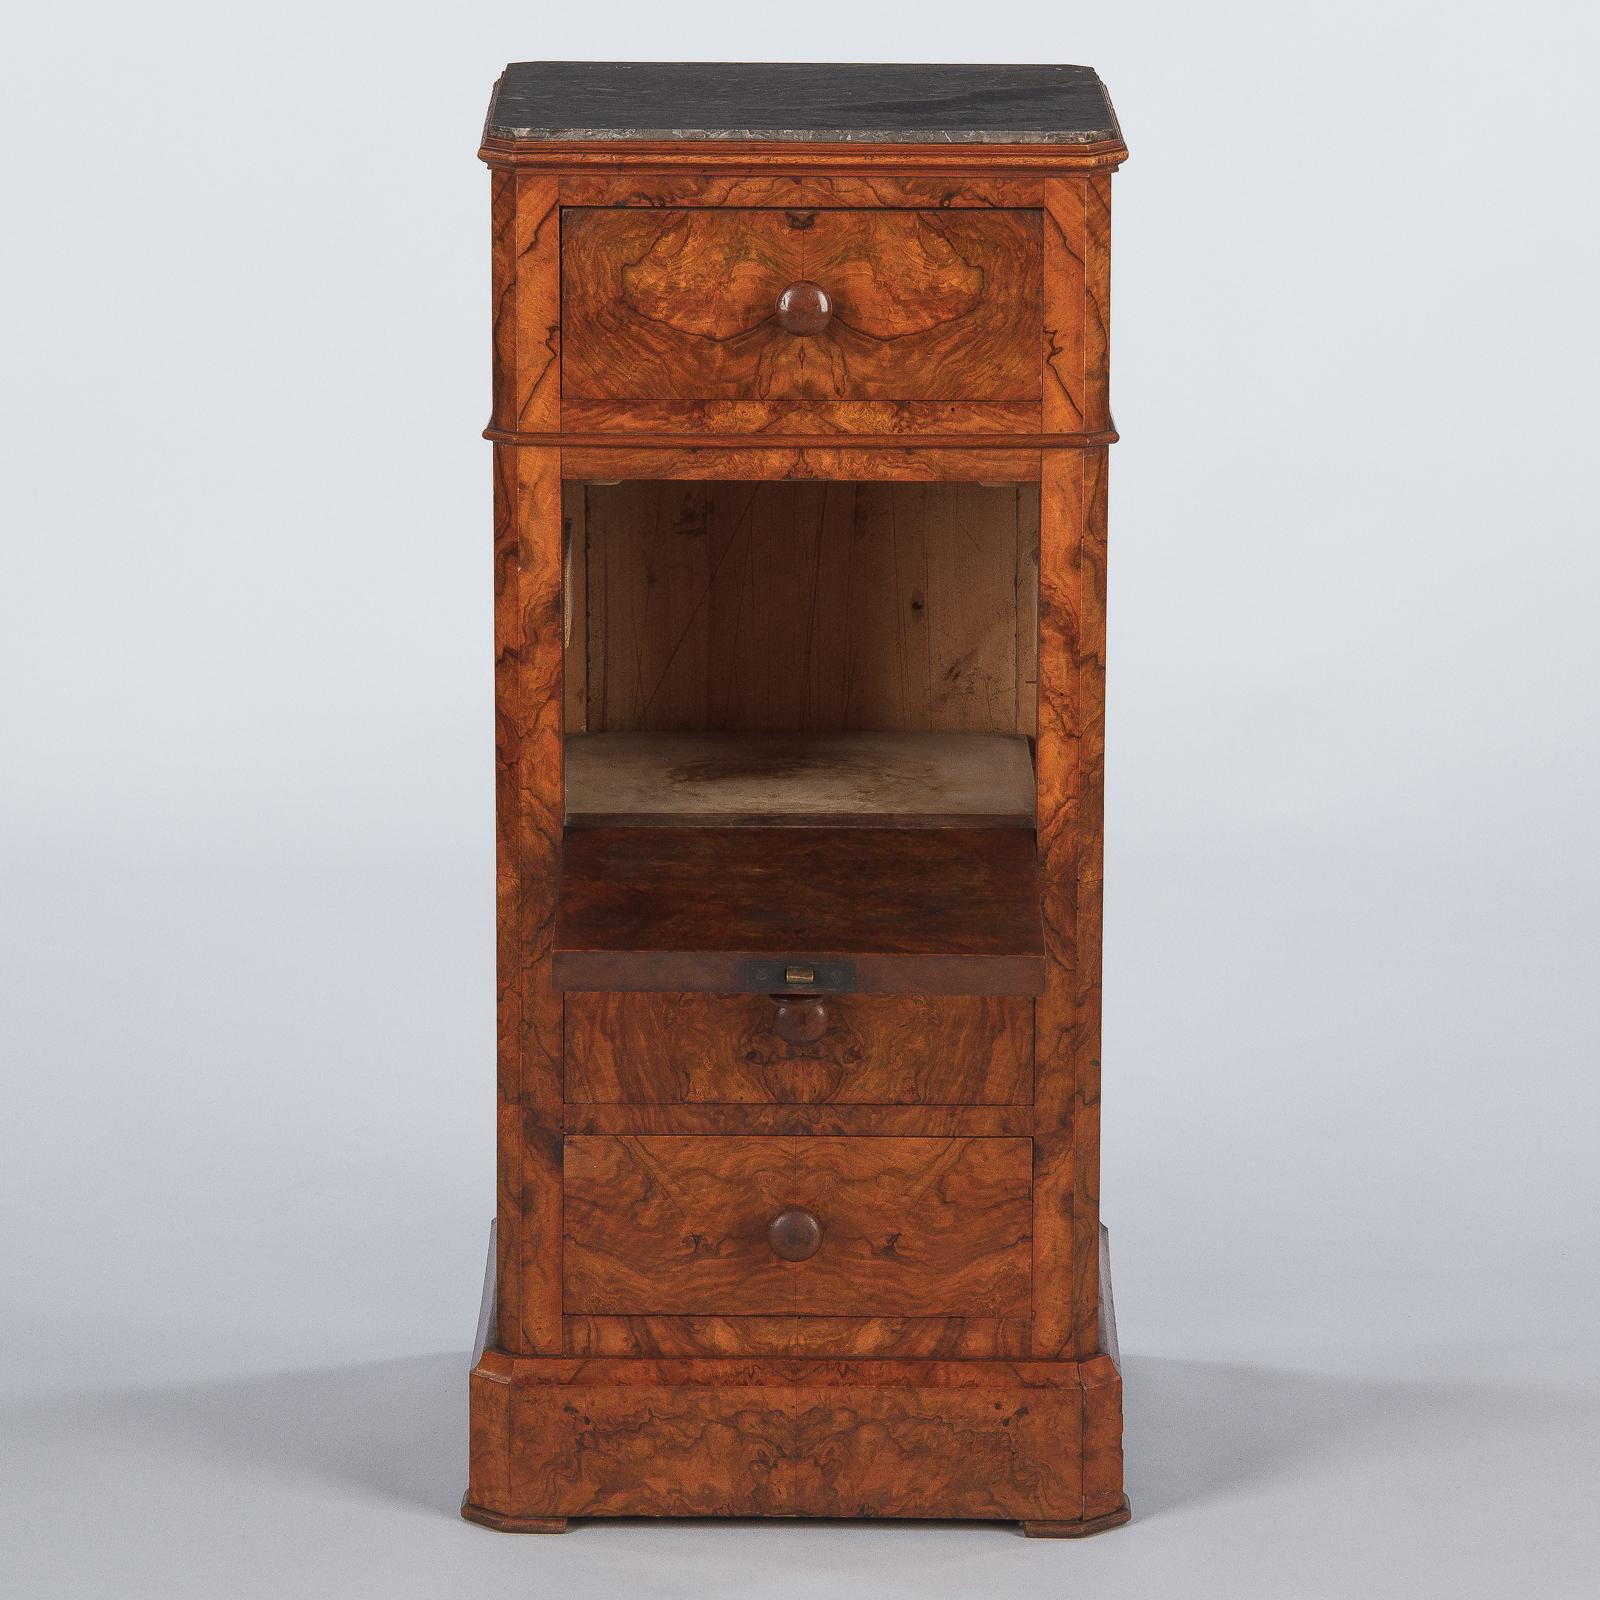 19th Century French Louis Philippe Burl Walnut Cabinet Nightstand with Marble Top, Mid-1800s